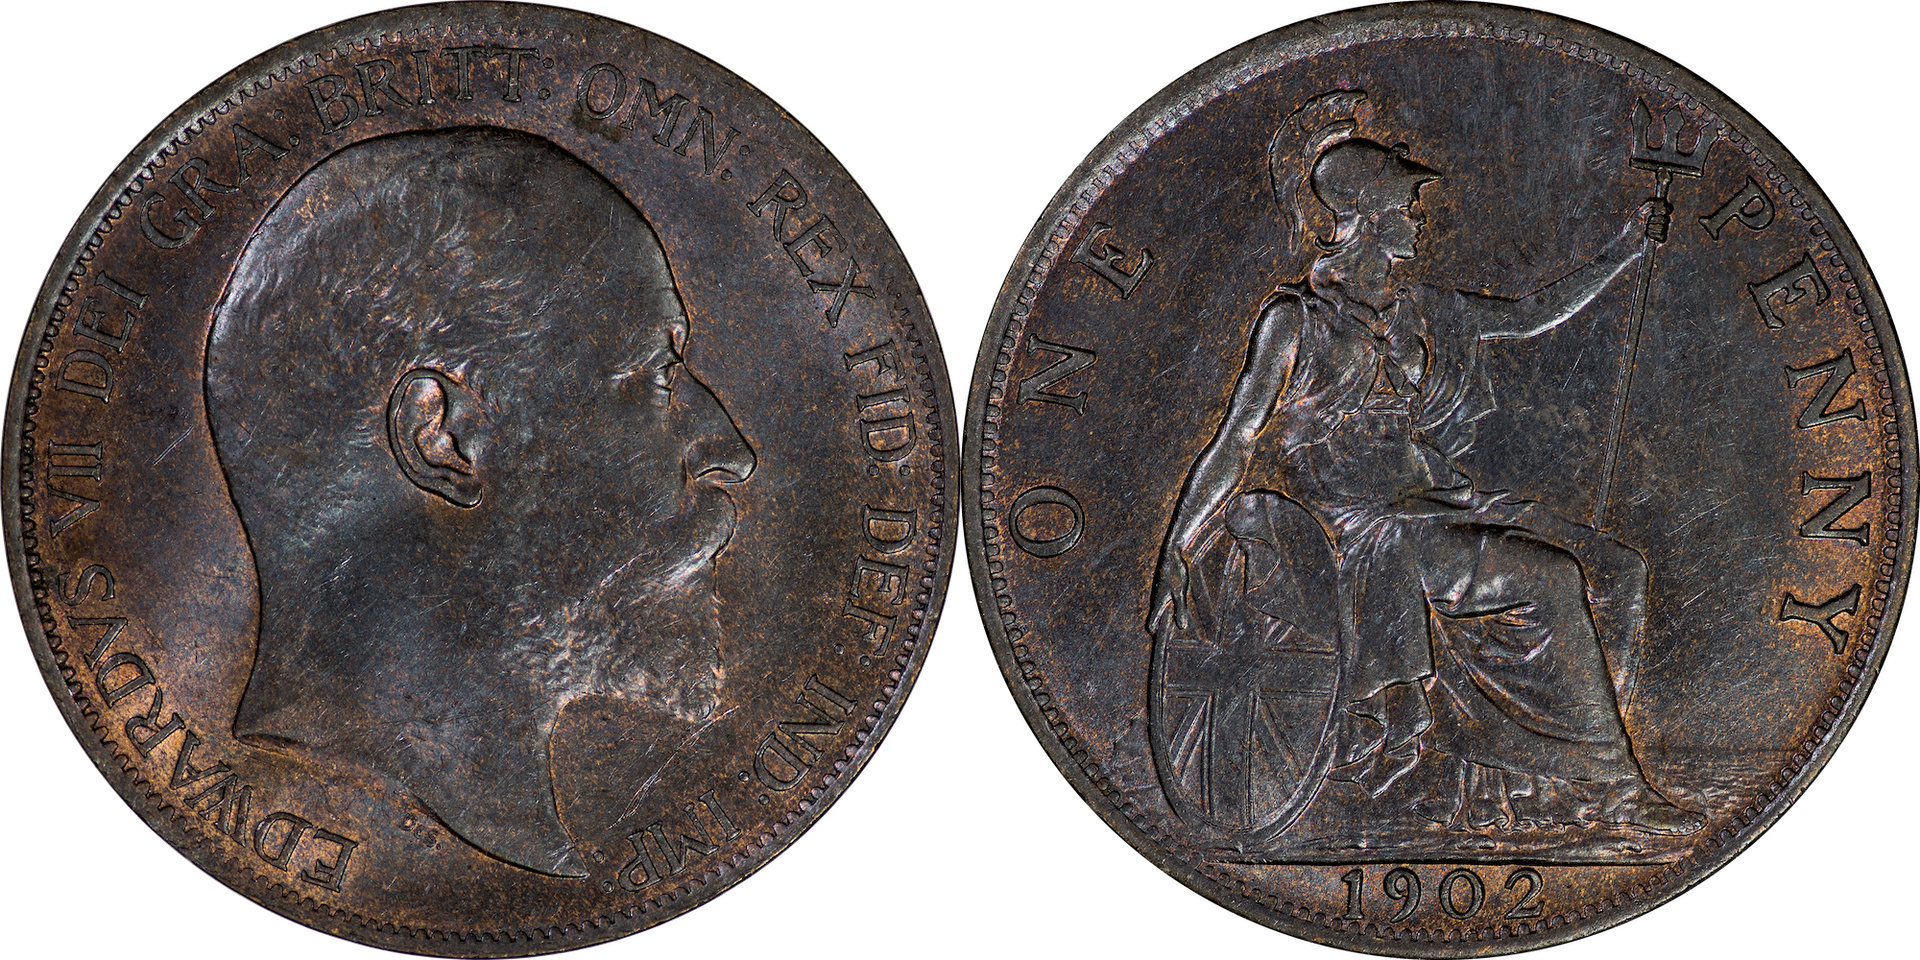 Great Britain - 1902 One Penny (Low Sea Level).jpg